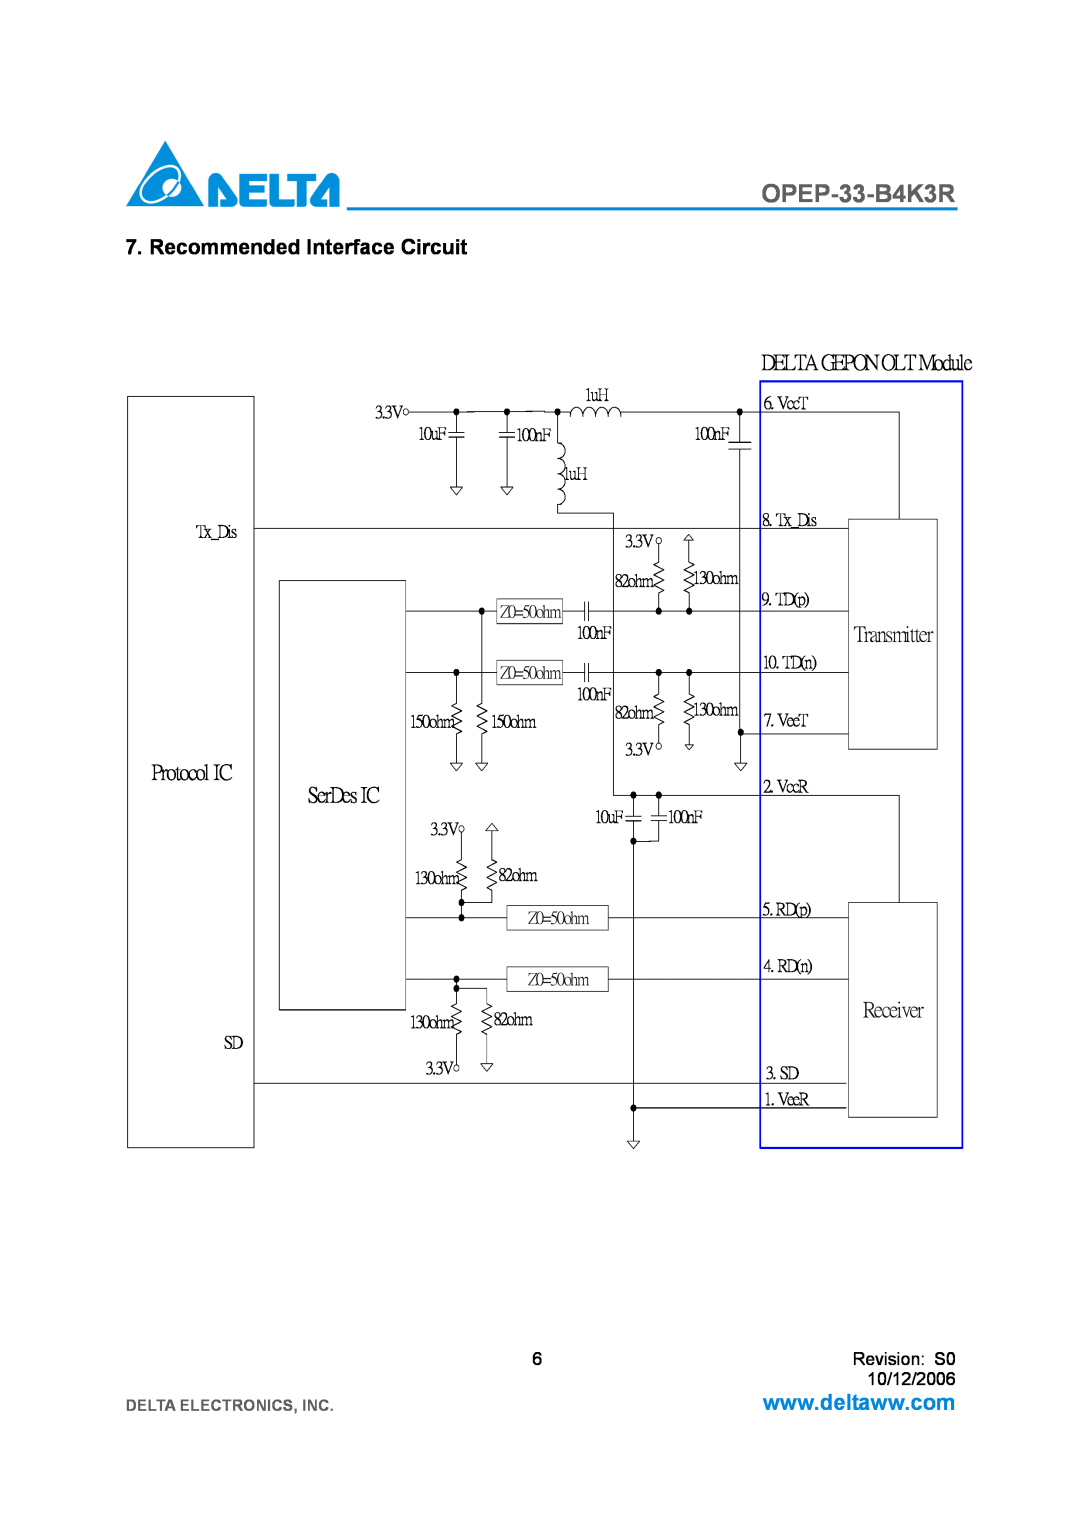 Delta Electronics OPEP-33-B4K3R manual Recommended Interface Circuit, Transmitter, Protocol IC, SerDes IC, Receiver 